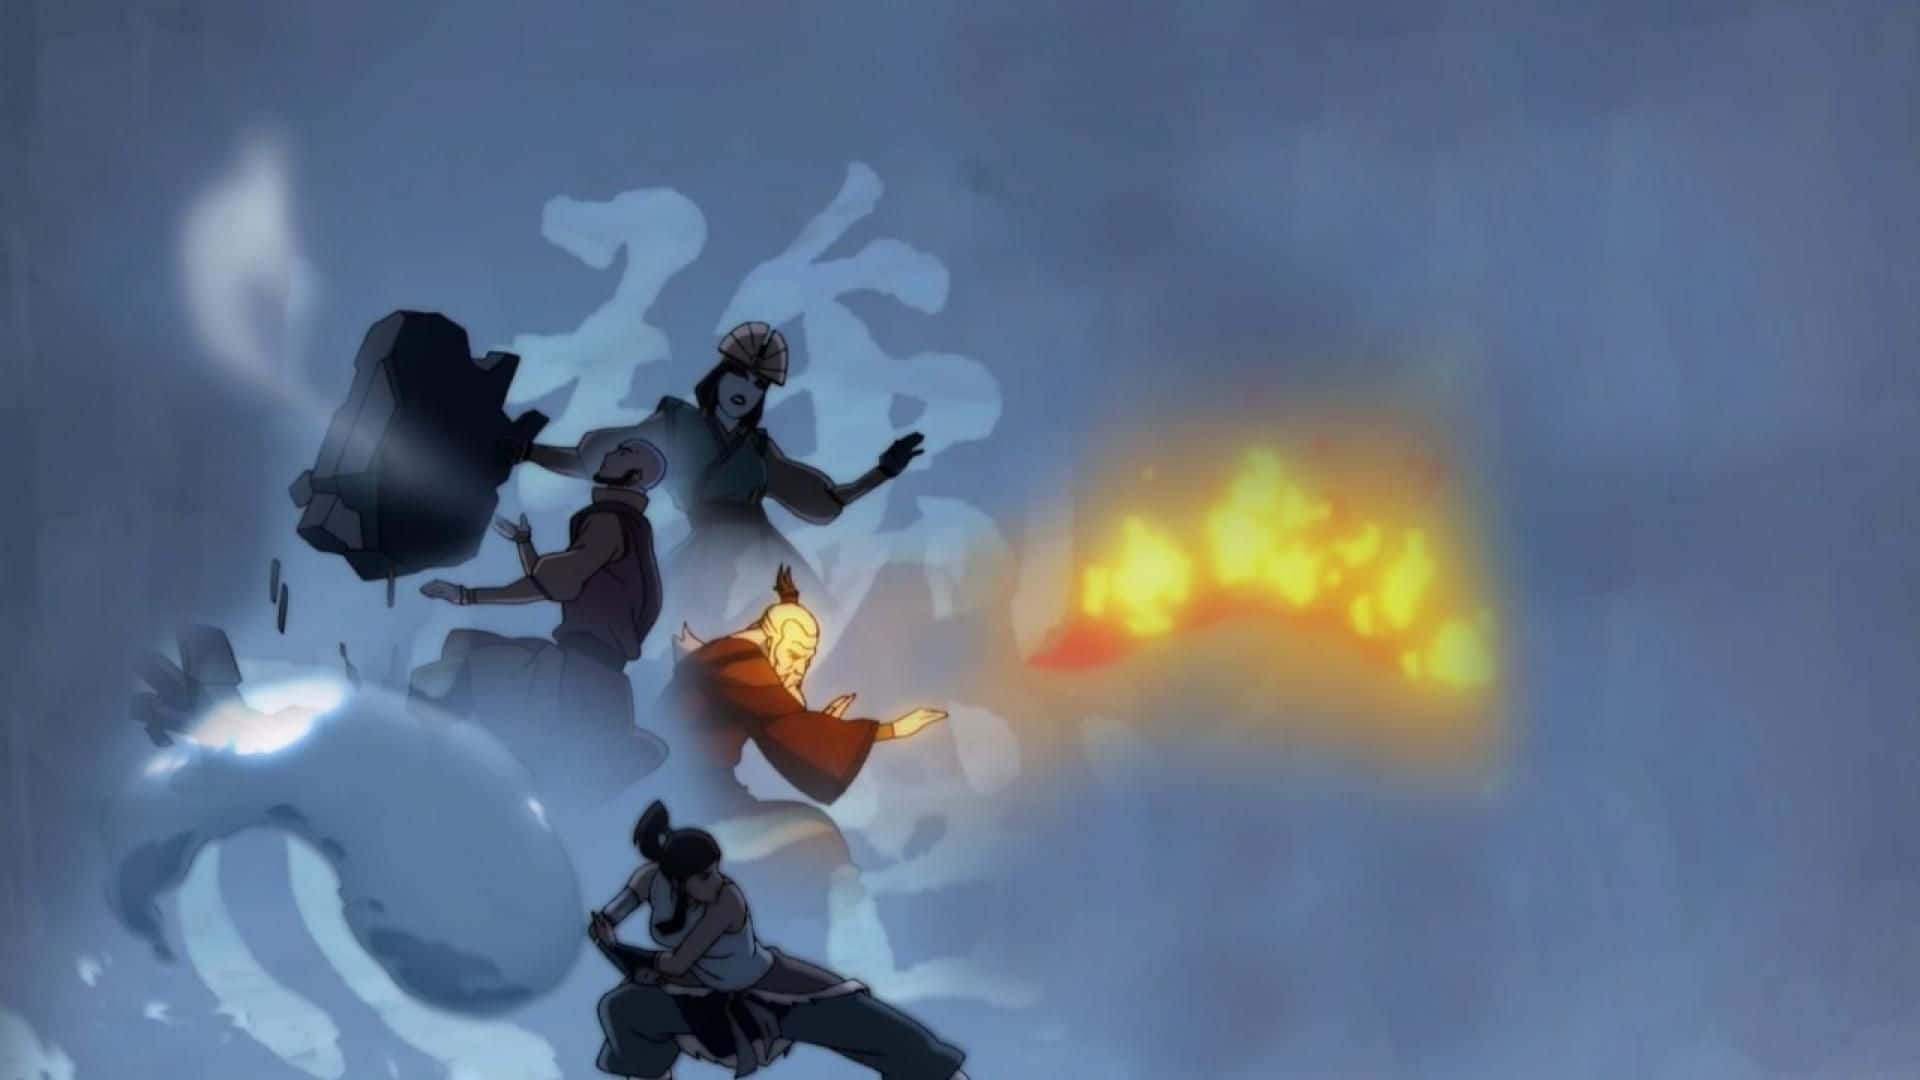 Korra unleashes her full potential and Avatar power to protect her kingdom. Wallpaper